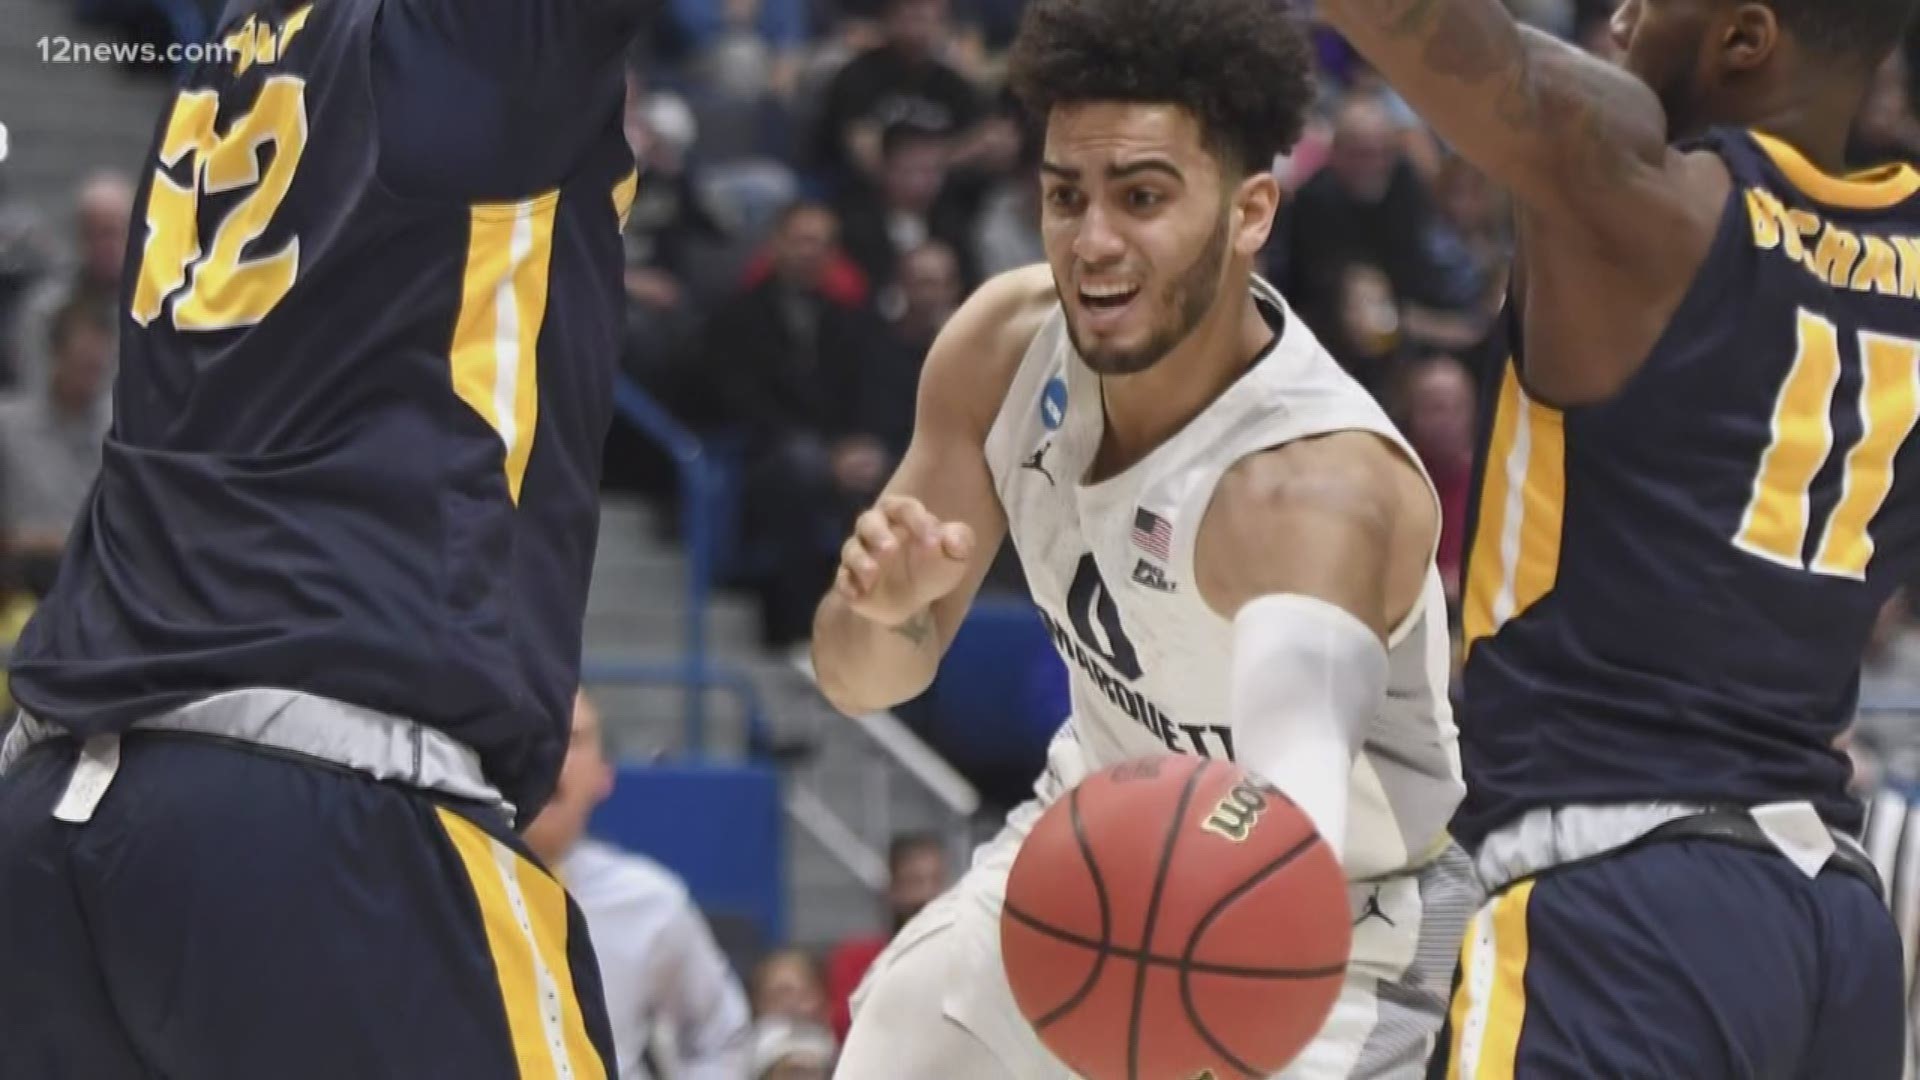 Unfortunately for Chandler's own Markus Howard, the NCAA Tournament is ending almost as quickly as it began. Now the Marquette junior has a difficult decision to make: leave school early for the NBA money or stick around for another shot at winning it all.